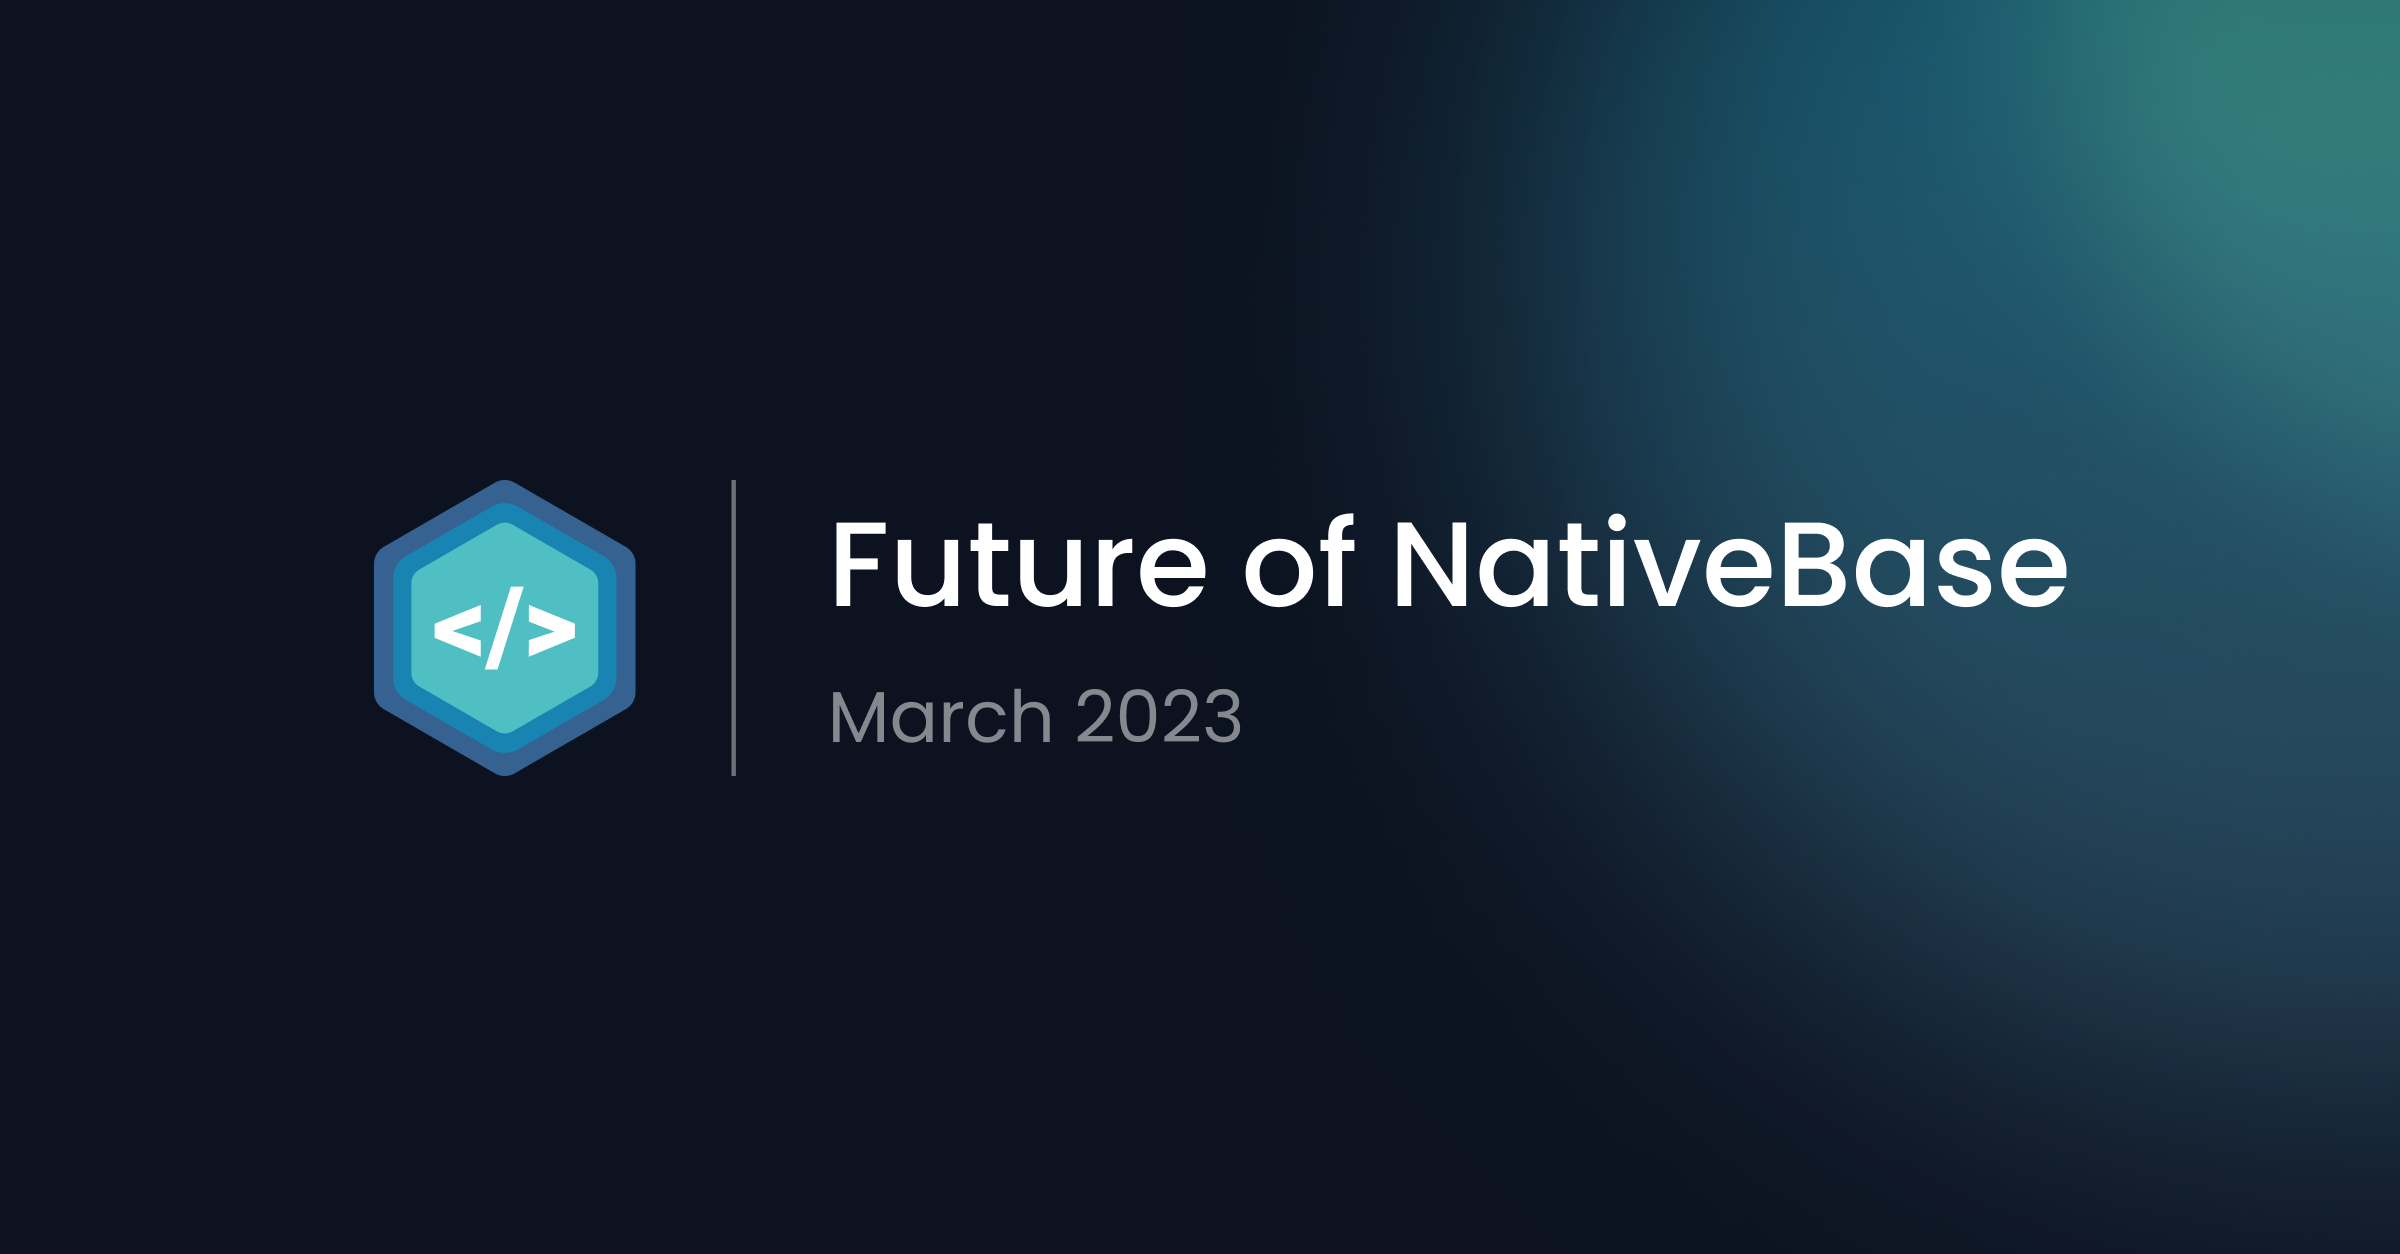 The future of NativeBase: March 2023